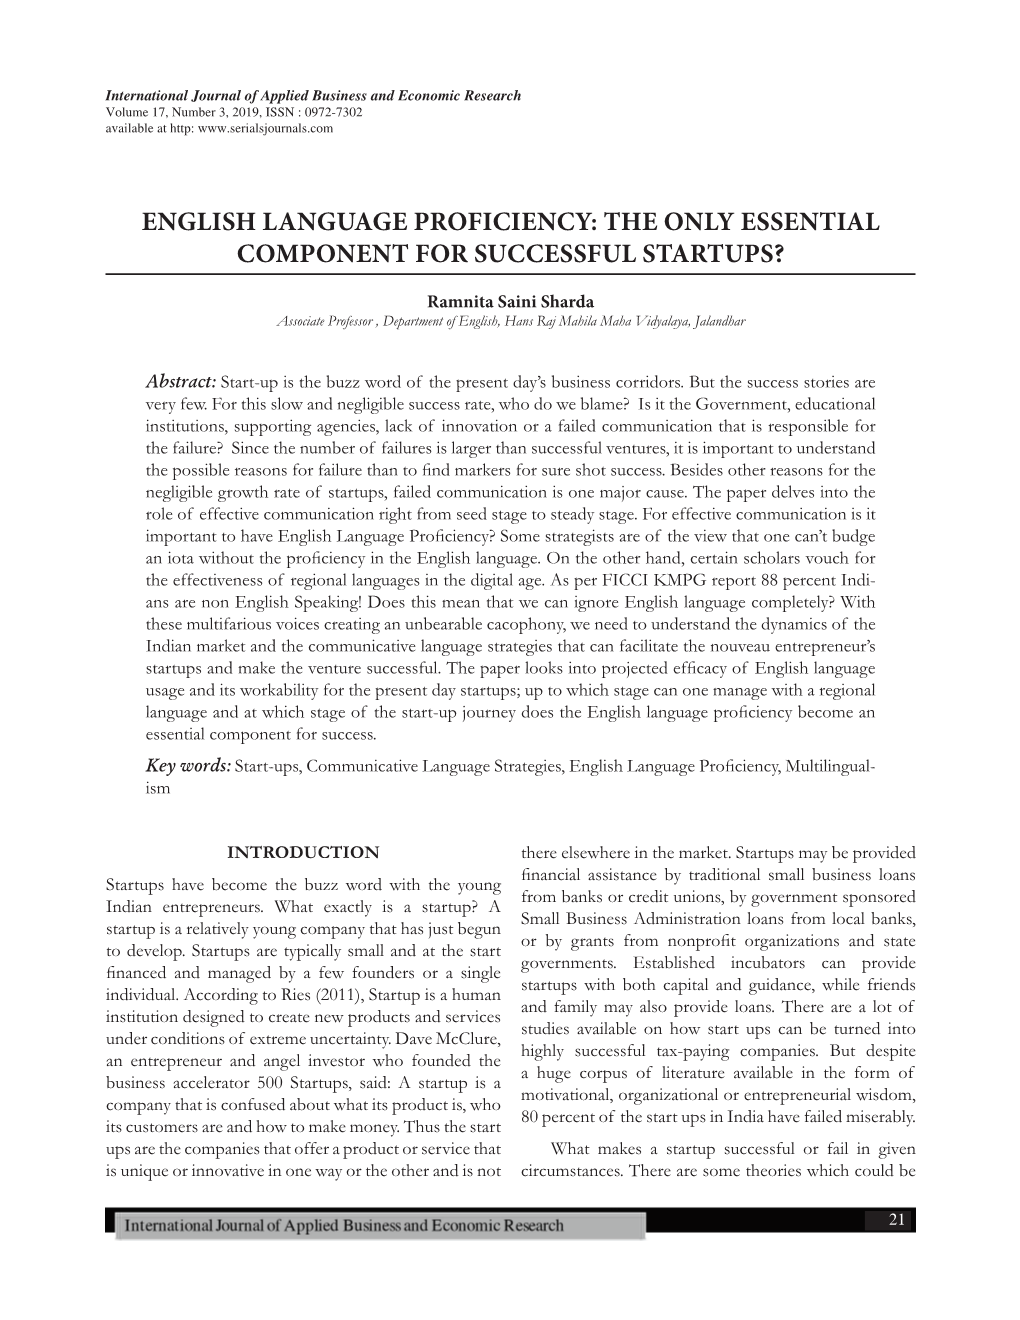 English Language Proficiency: the Only Essential Component for Successful Startups?